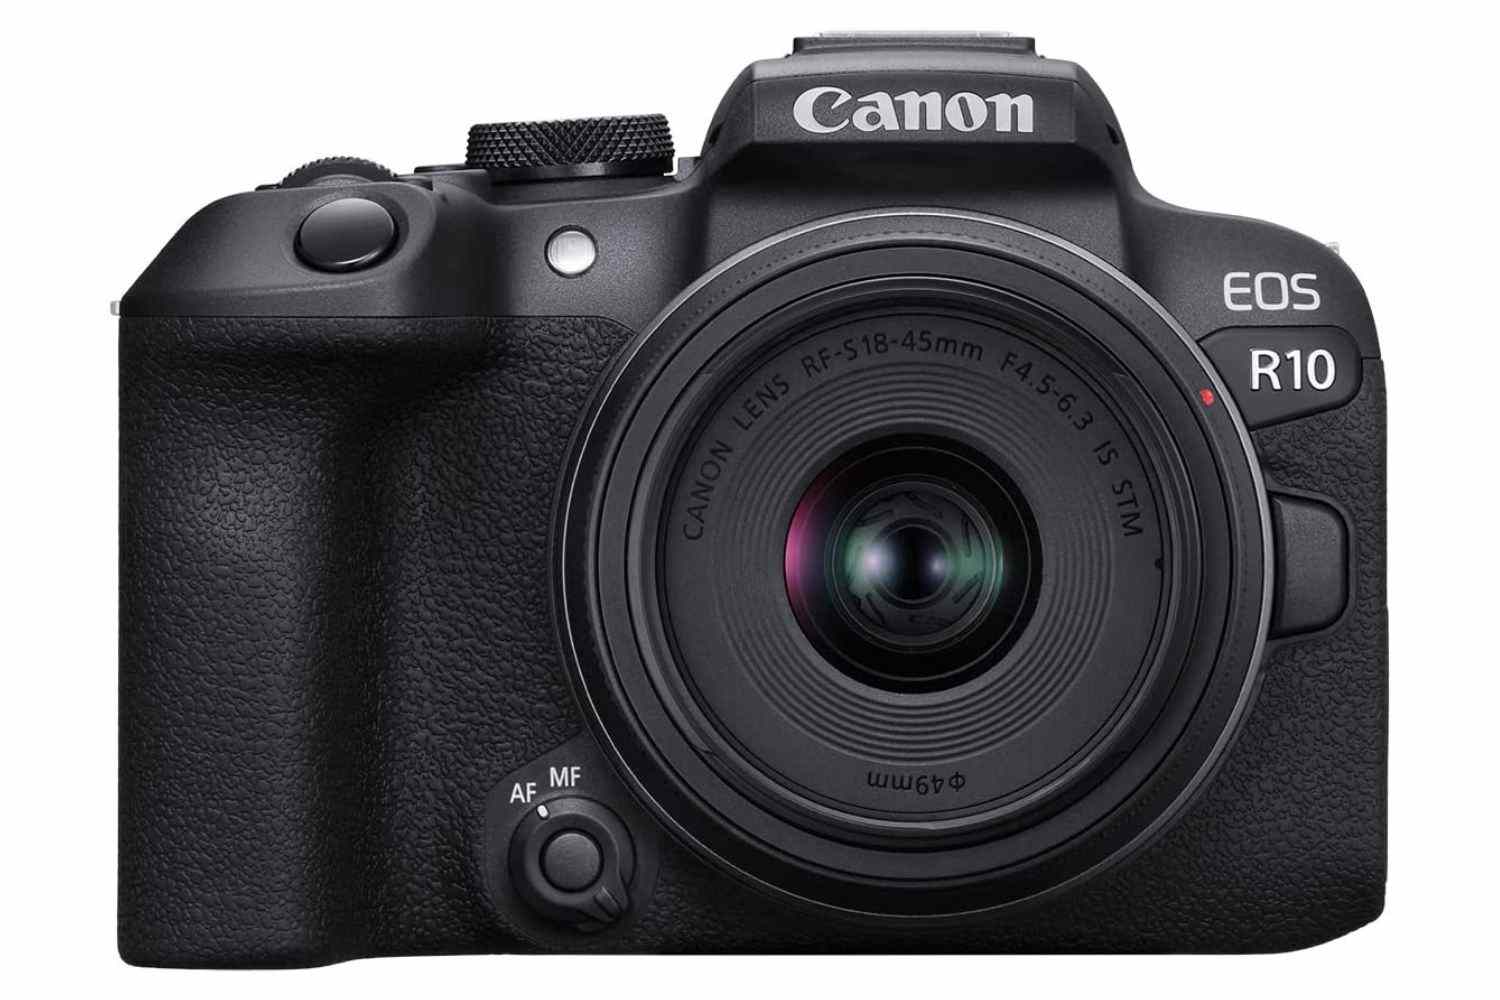  Canon EOS M50 Mirrorless Digital 4K Vlogging Camera with Dual  Pixel CMOS Autofocus, DIGIC 8 Image Processor, Built-in Wi-Fi, NFC and  Bluetooth technology, Body, Black : Electronics